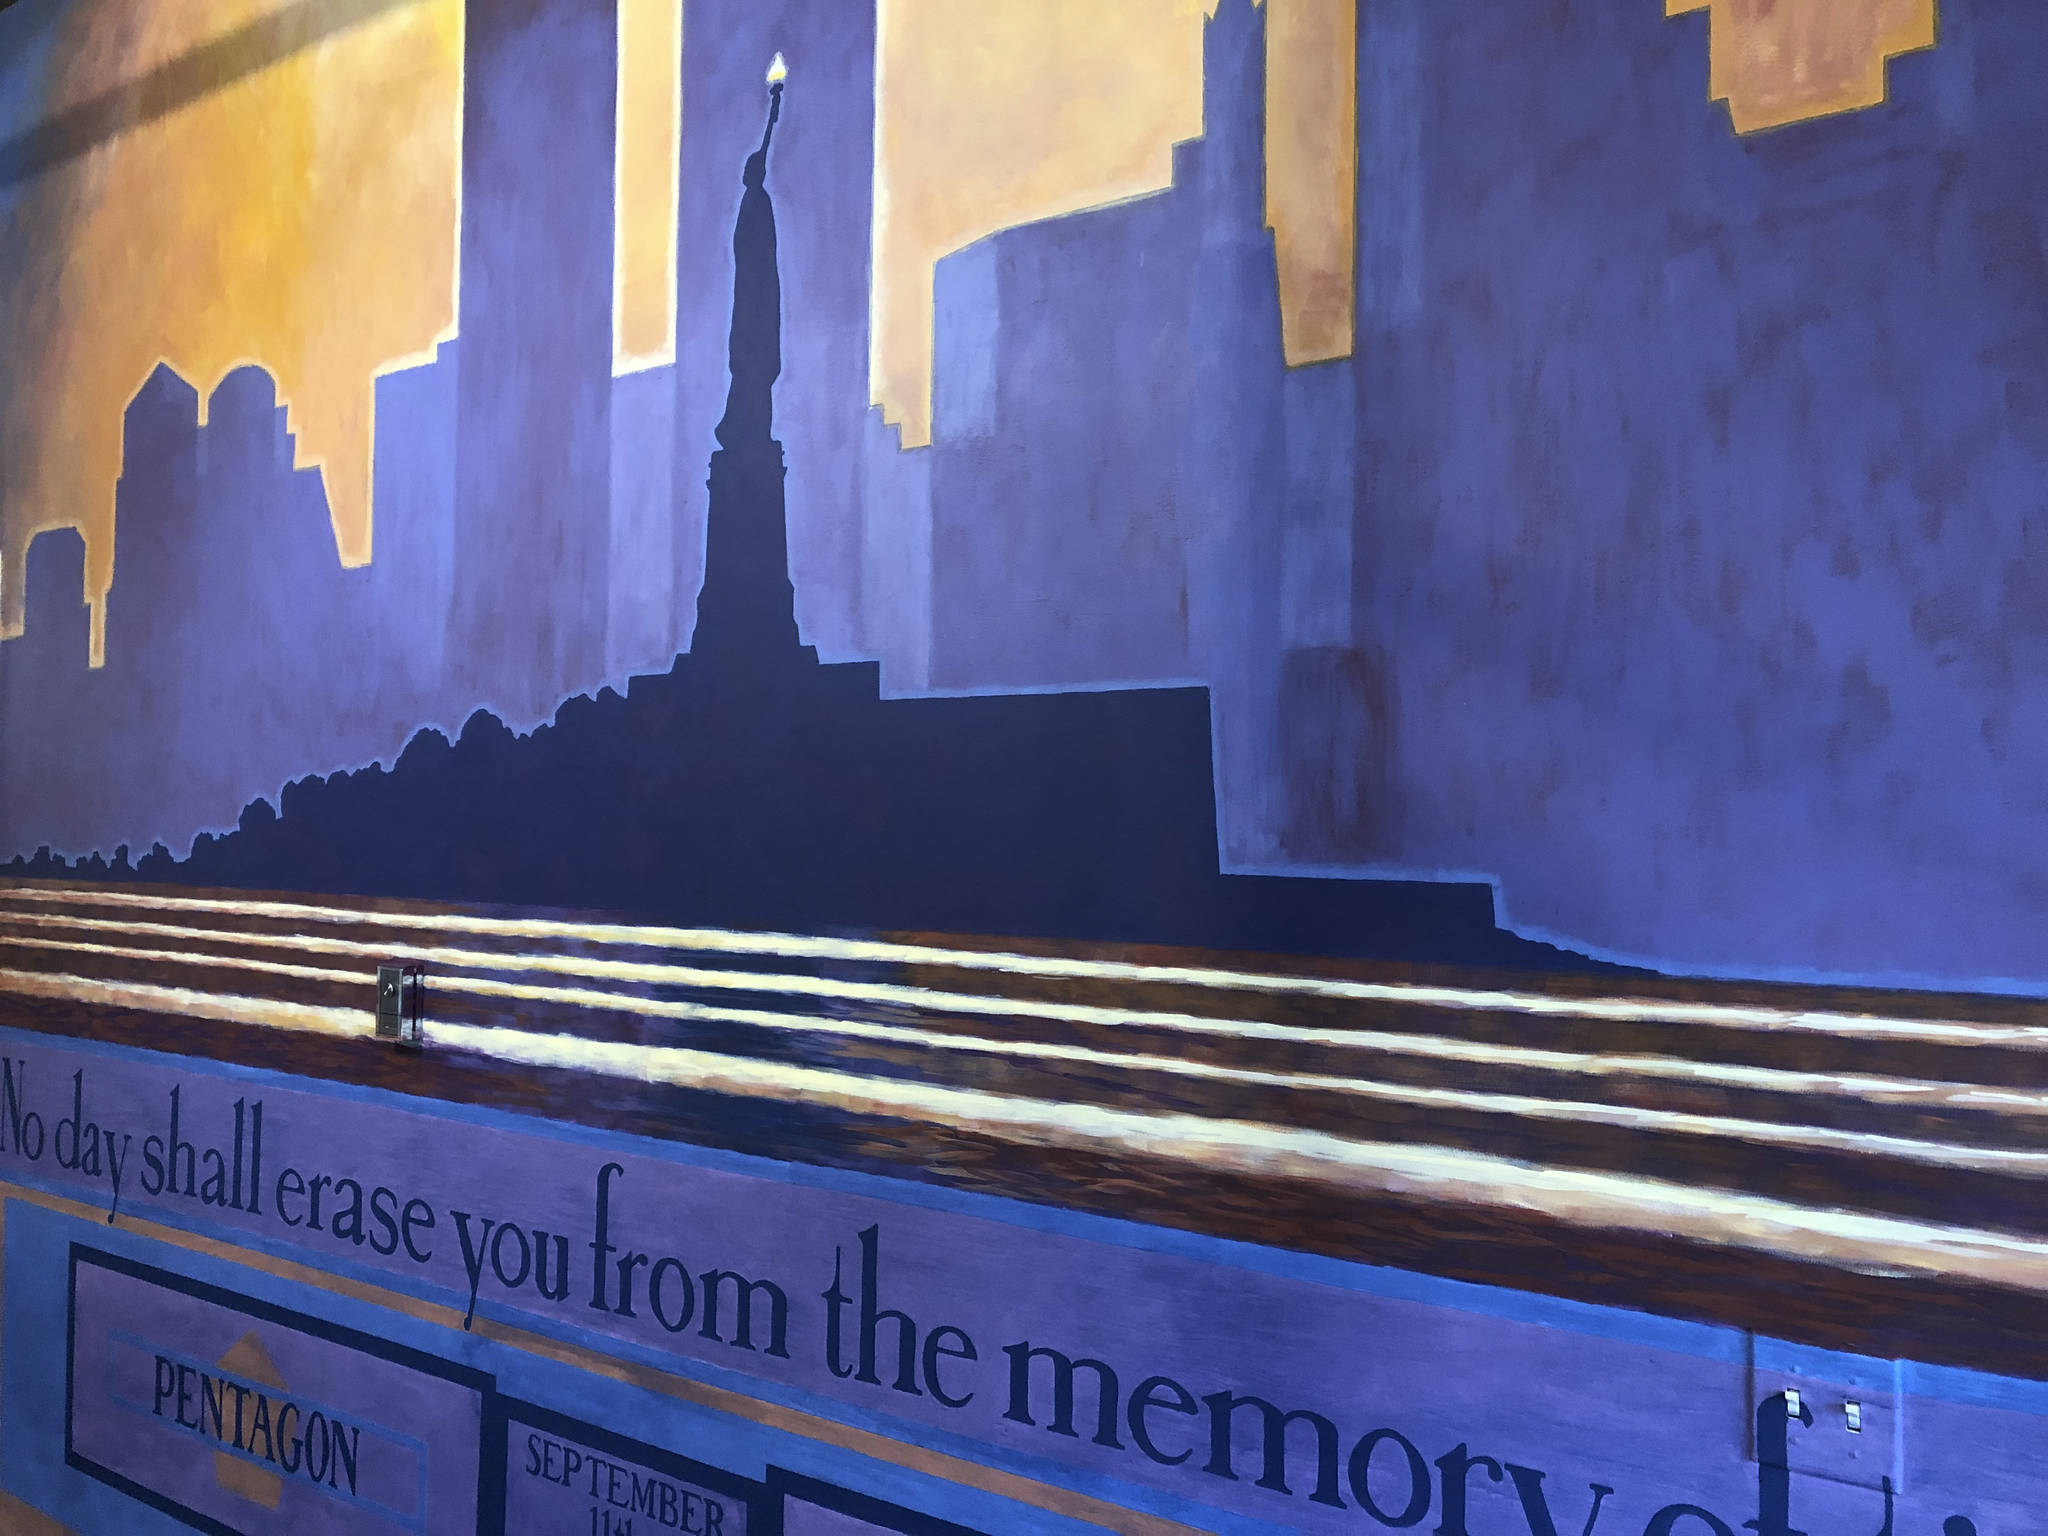 Eastsound Fire Station’s mural project remembers 9/11